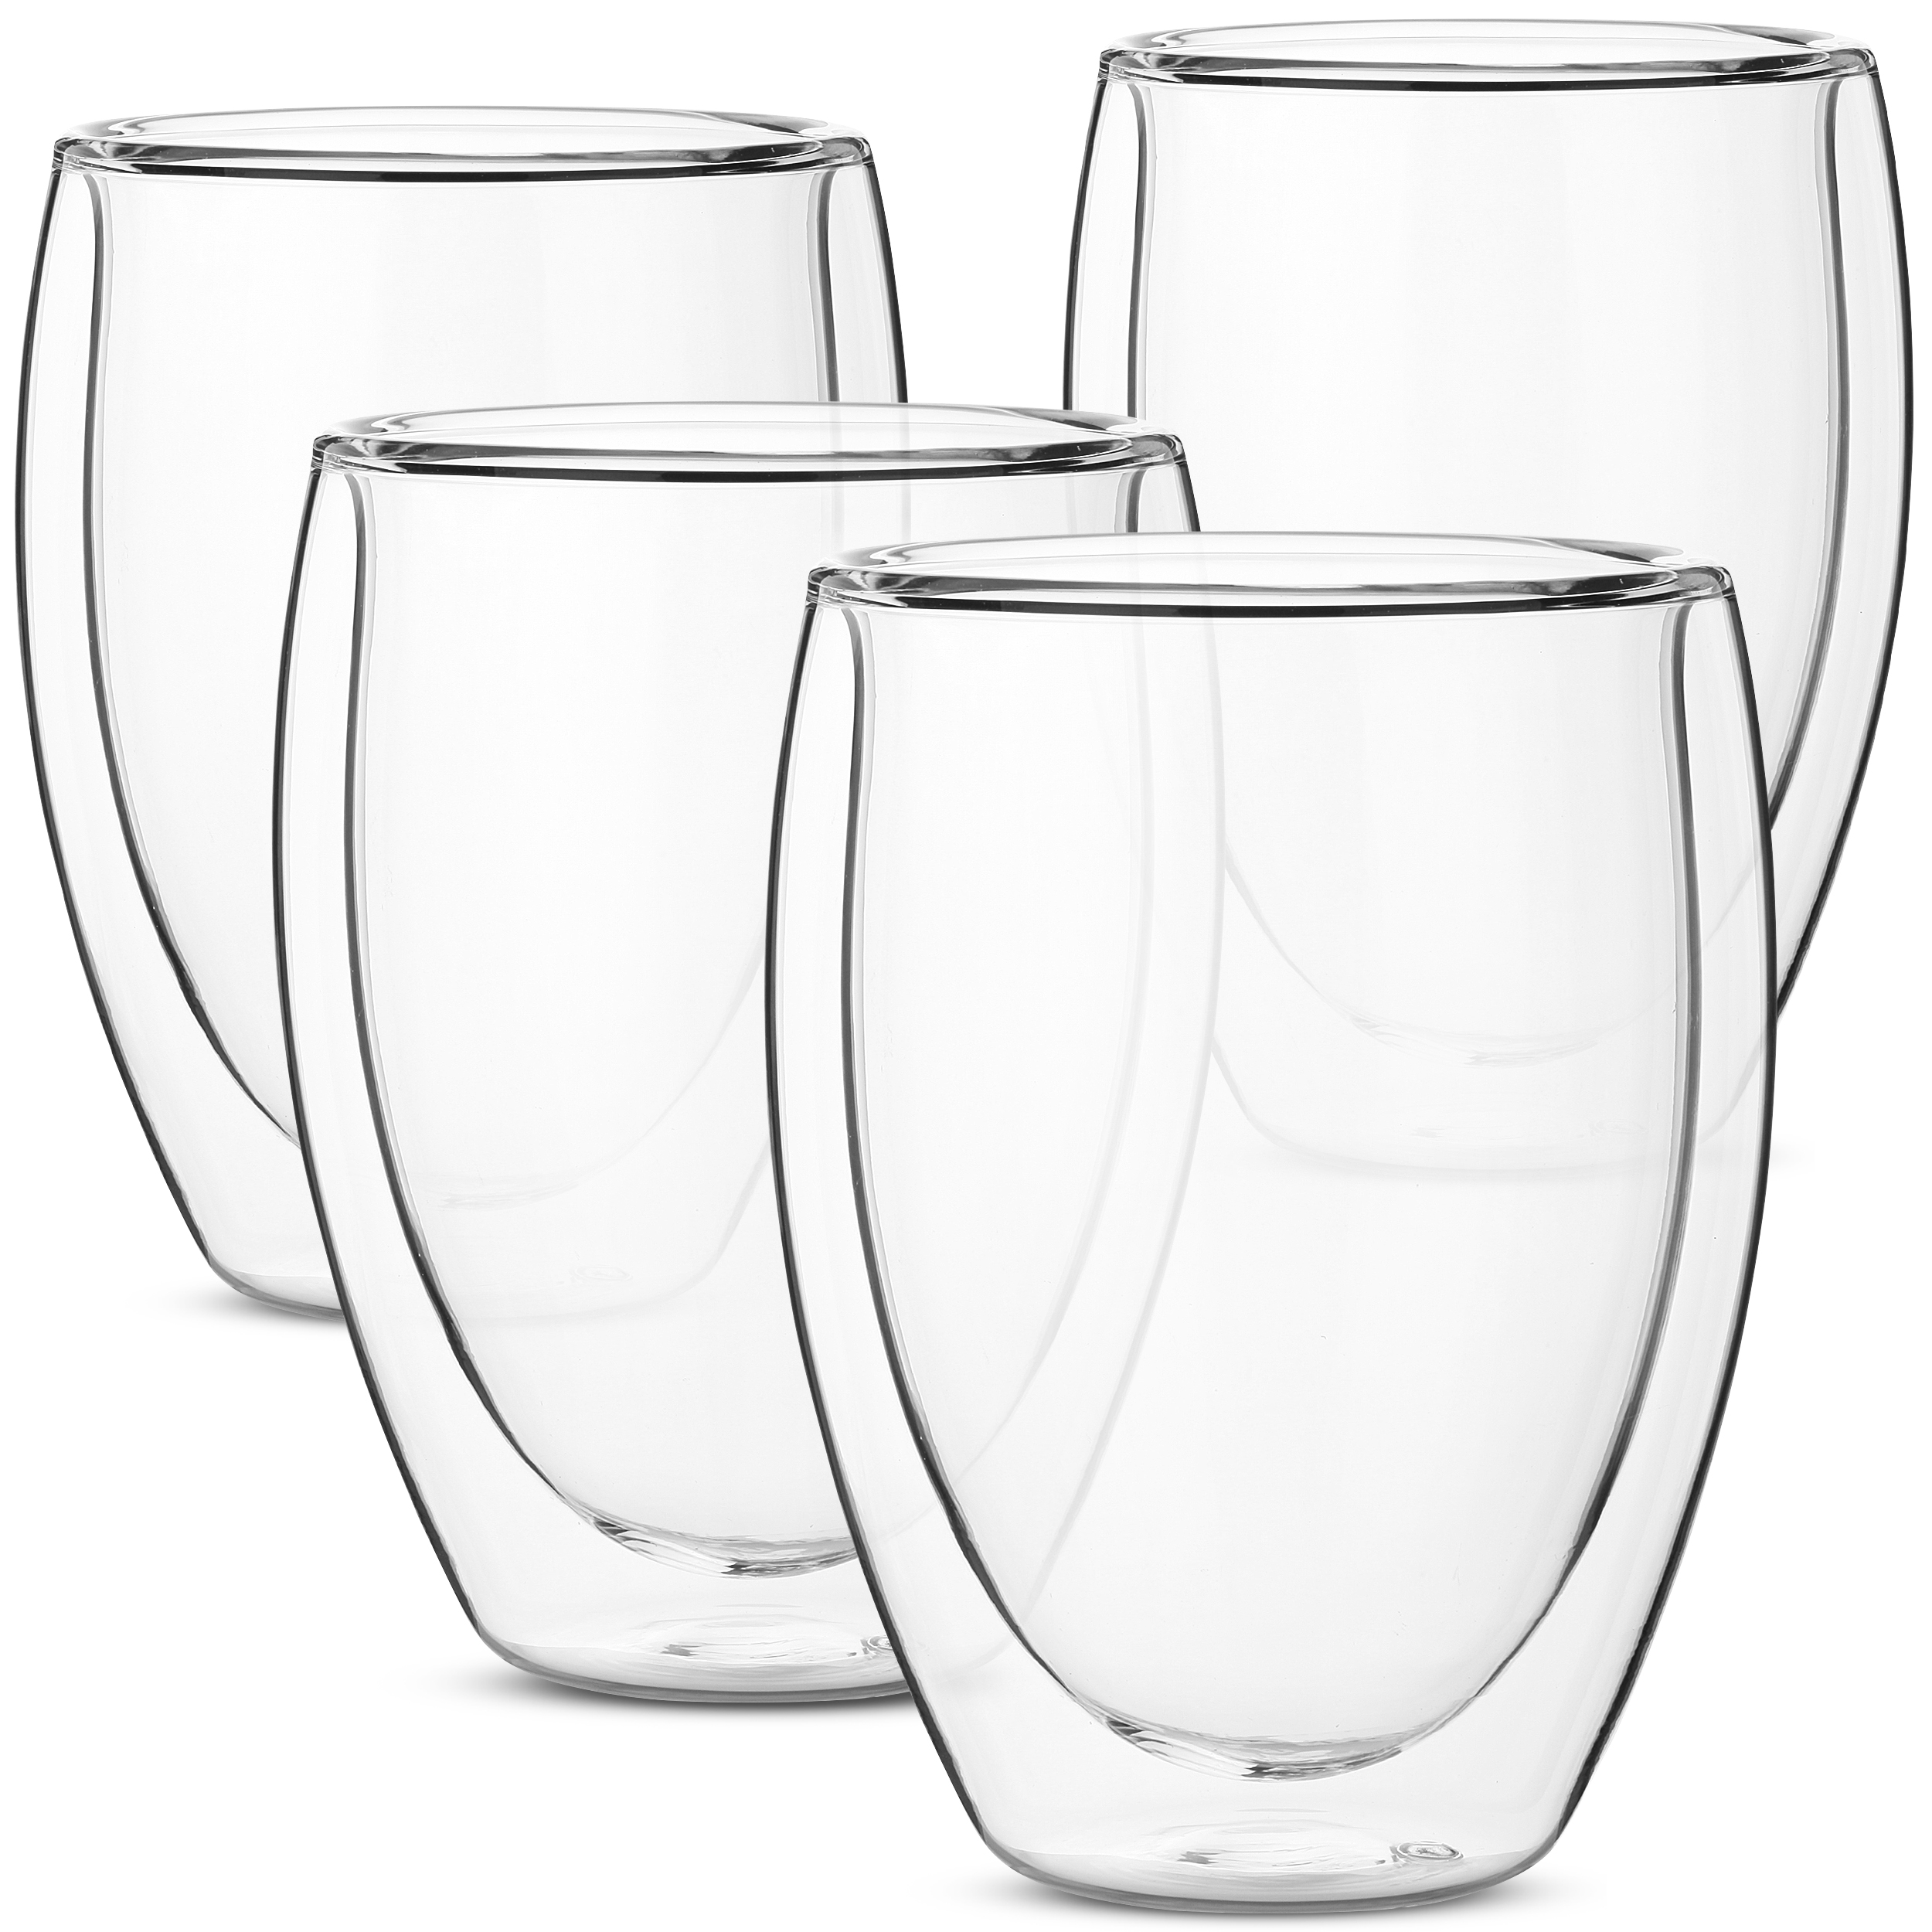 BTAT INSULATED DRINKING GLASSES DOUBLE WALL GLASS SET OF 4 6.5 OZ 190 ML